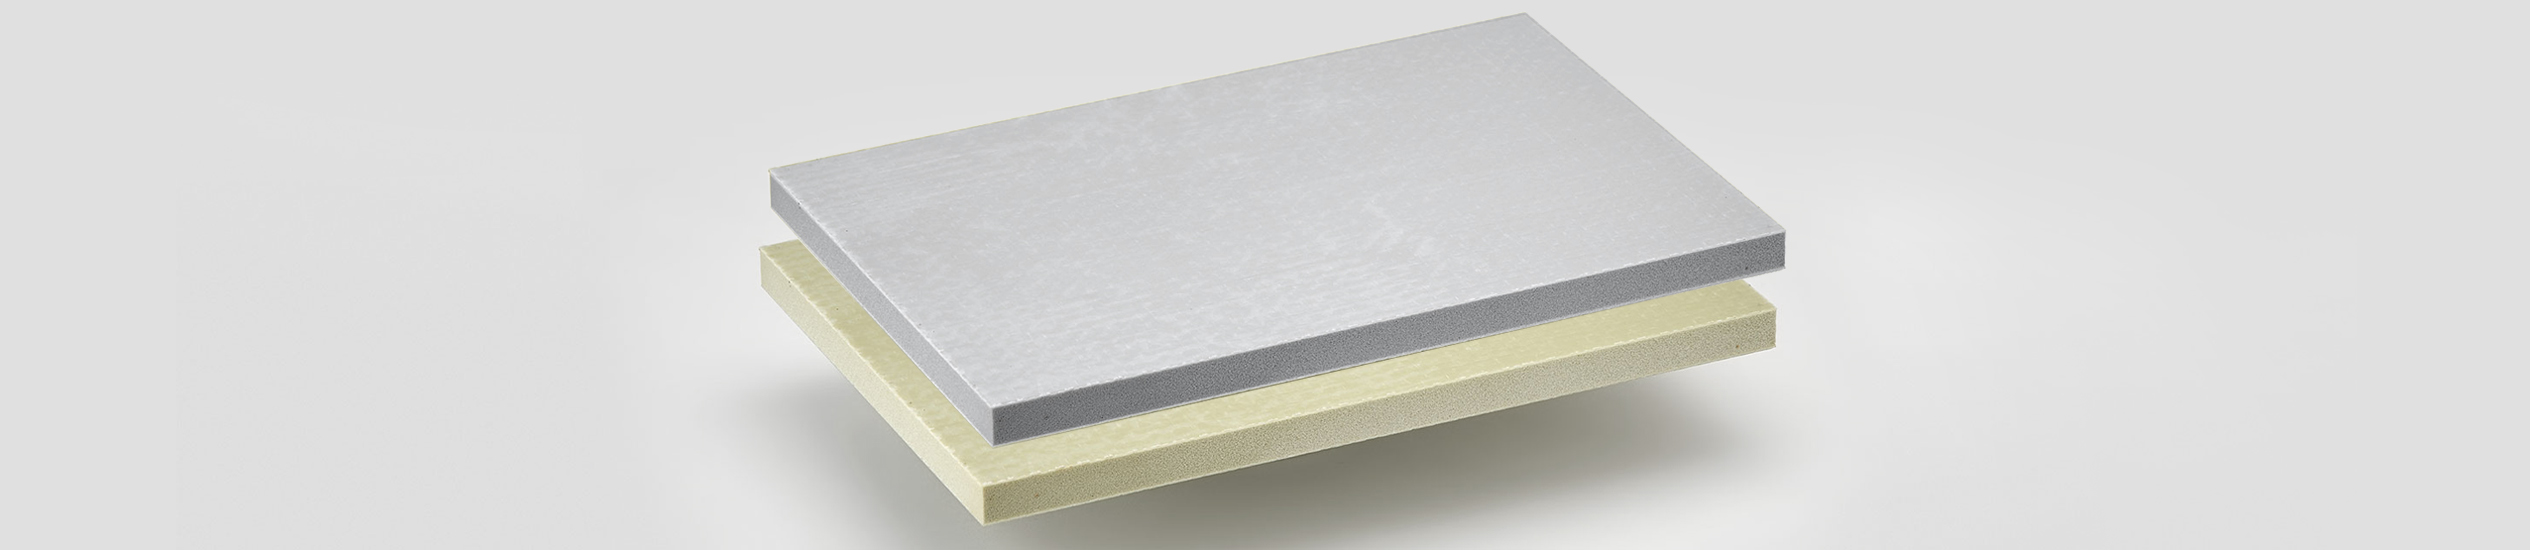 FOAMSTEP is a lightweight sandwich panel with a core in PET and PVC foam with glass fibre reinforced with epoxy resin.